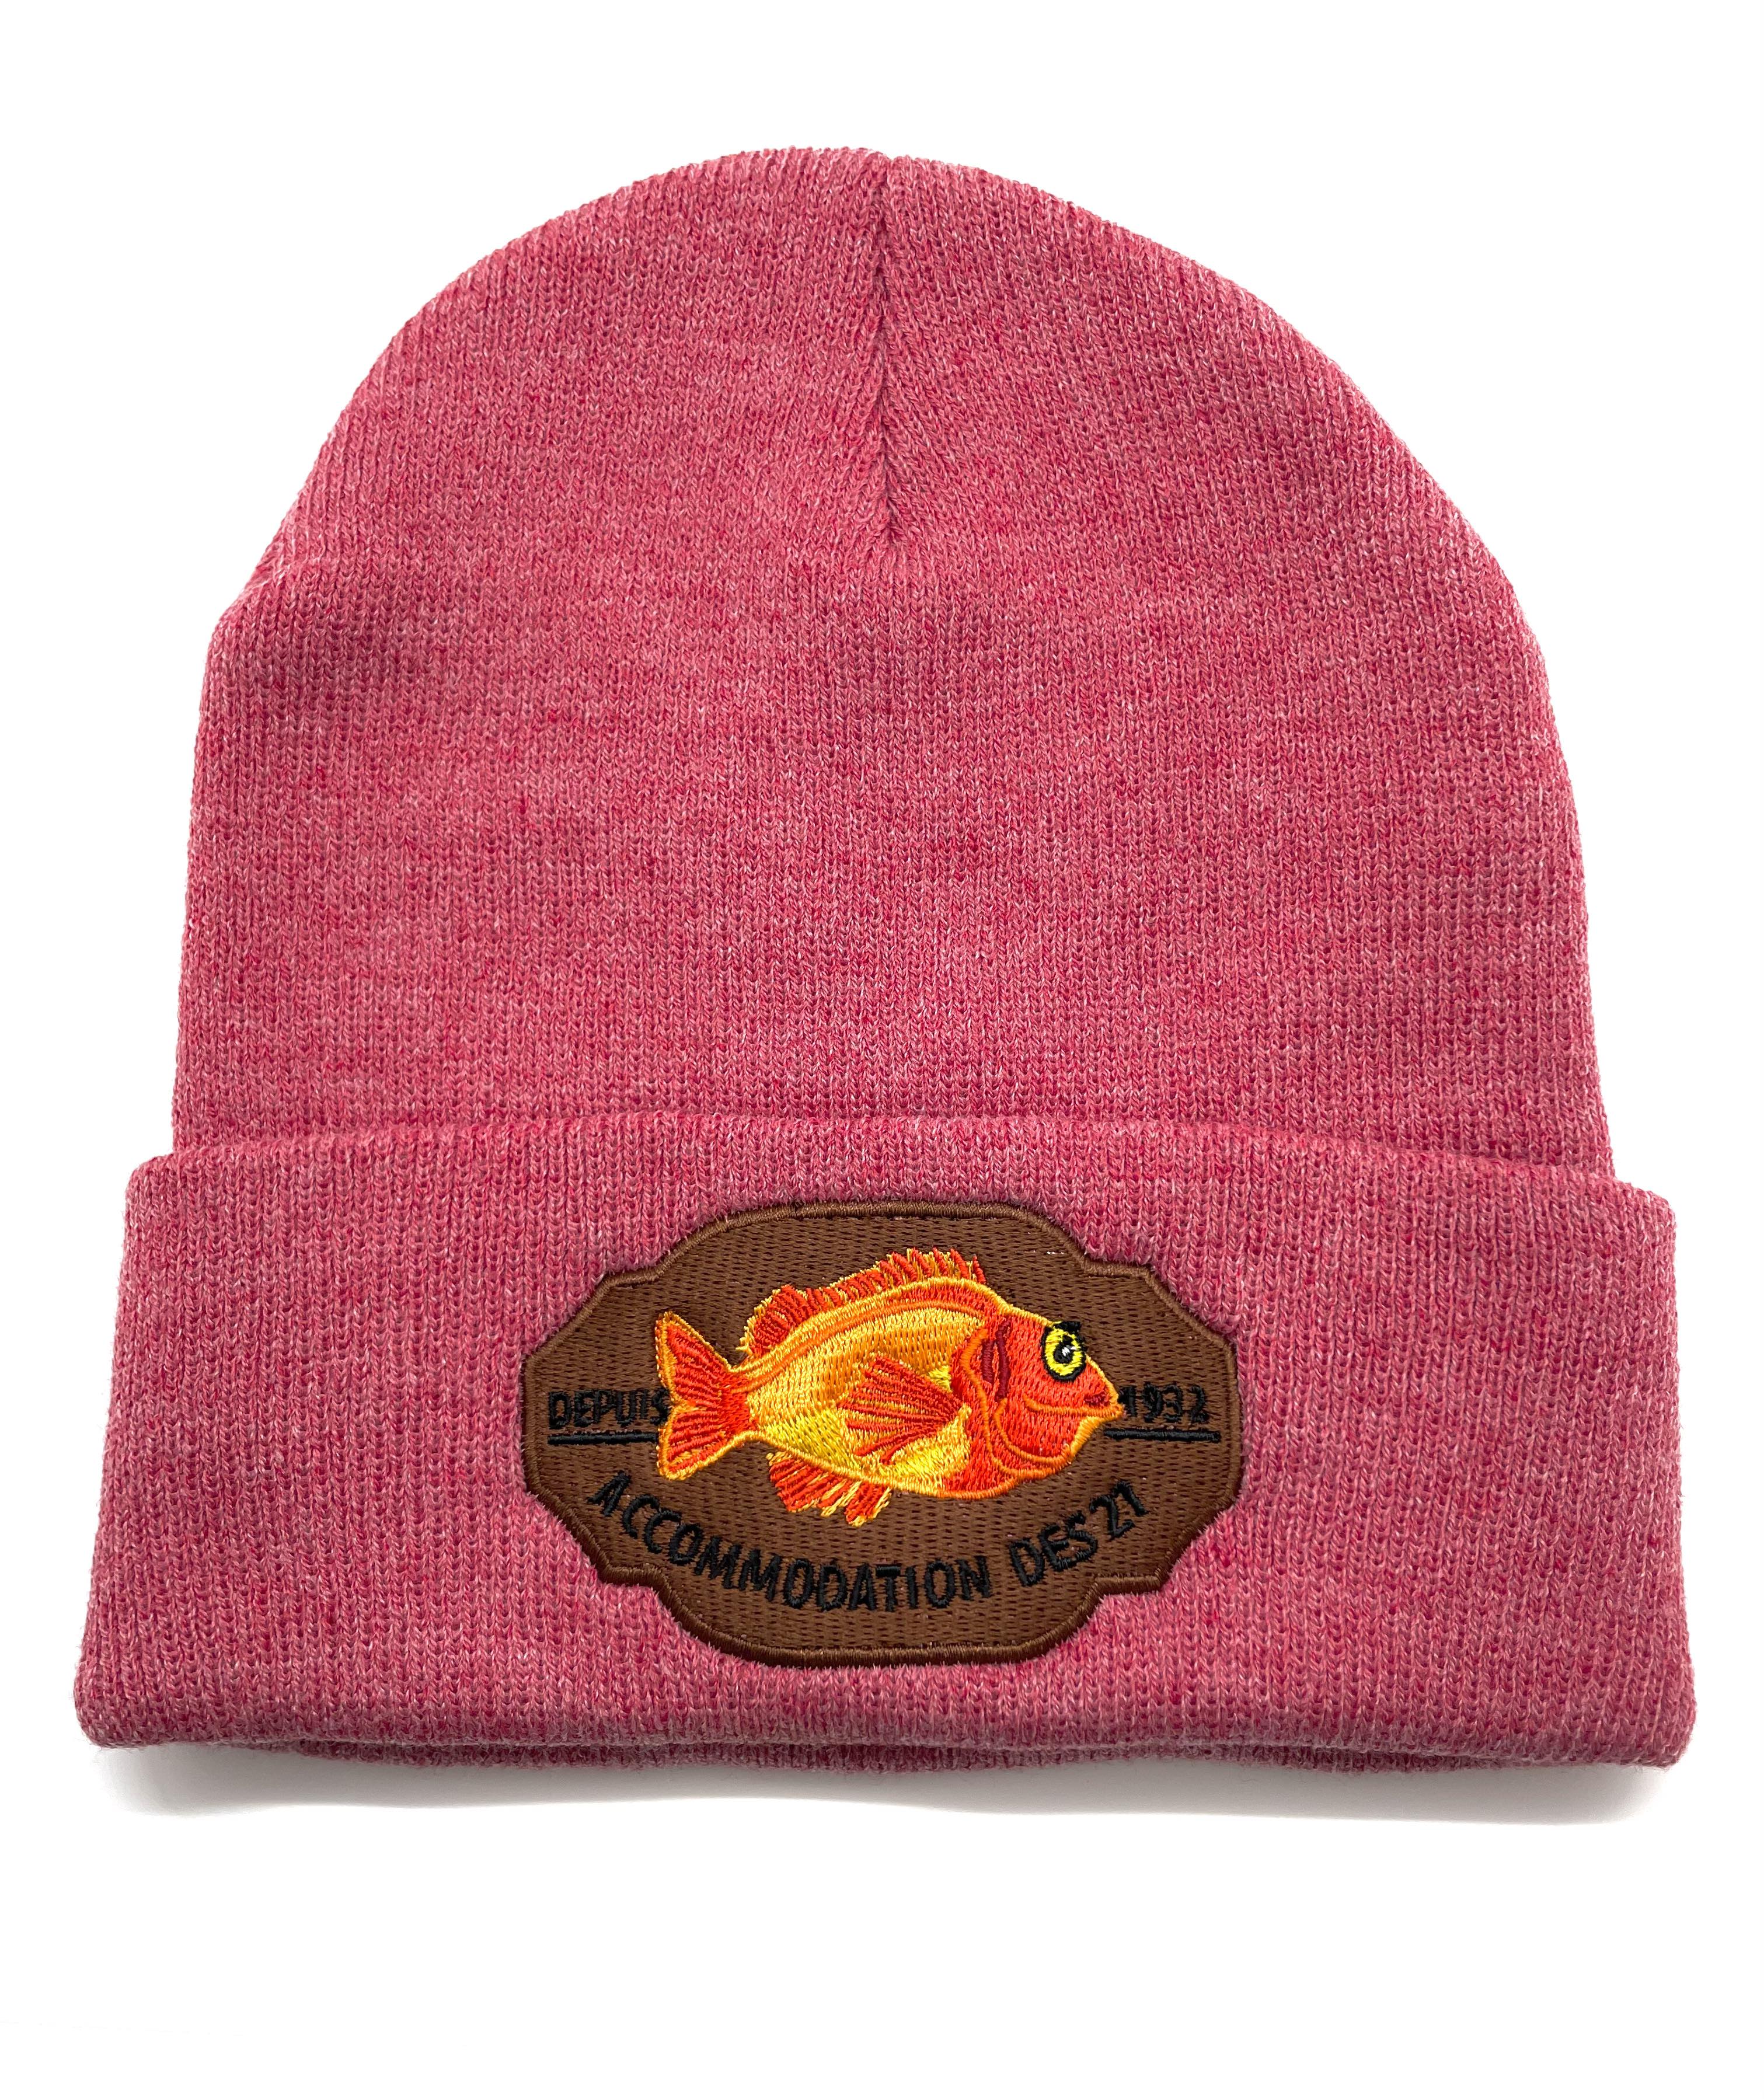 Tuque Rose Accommodation des 21